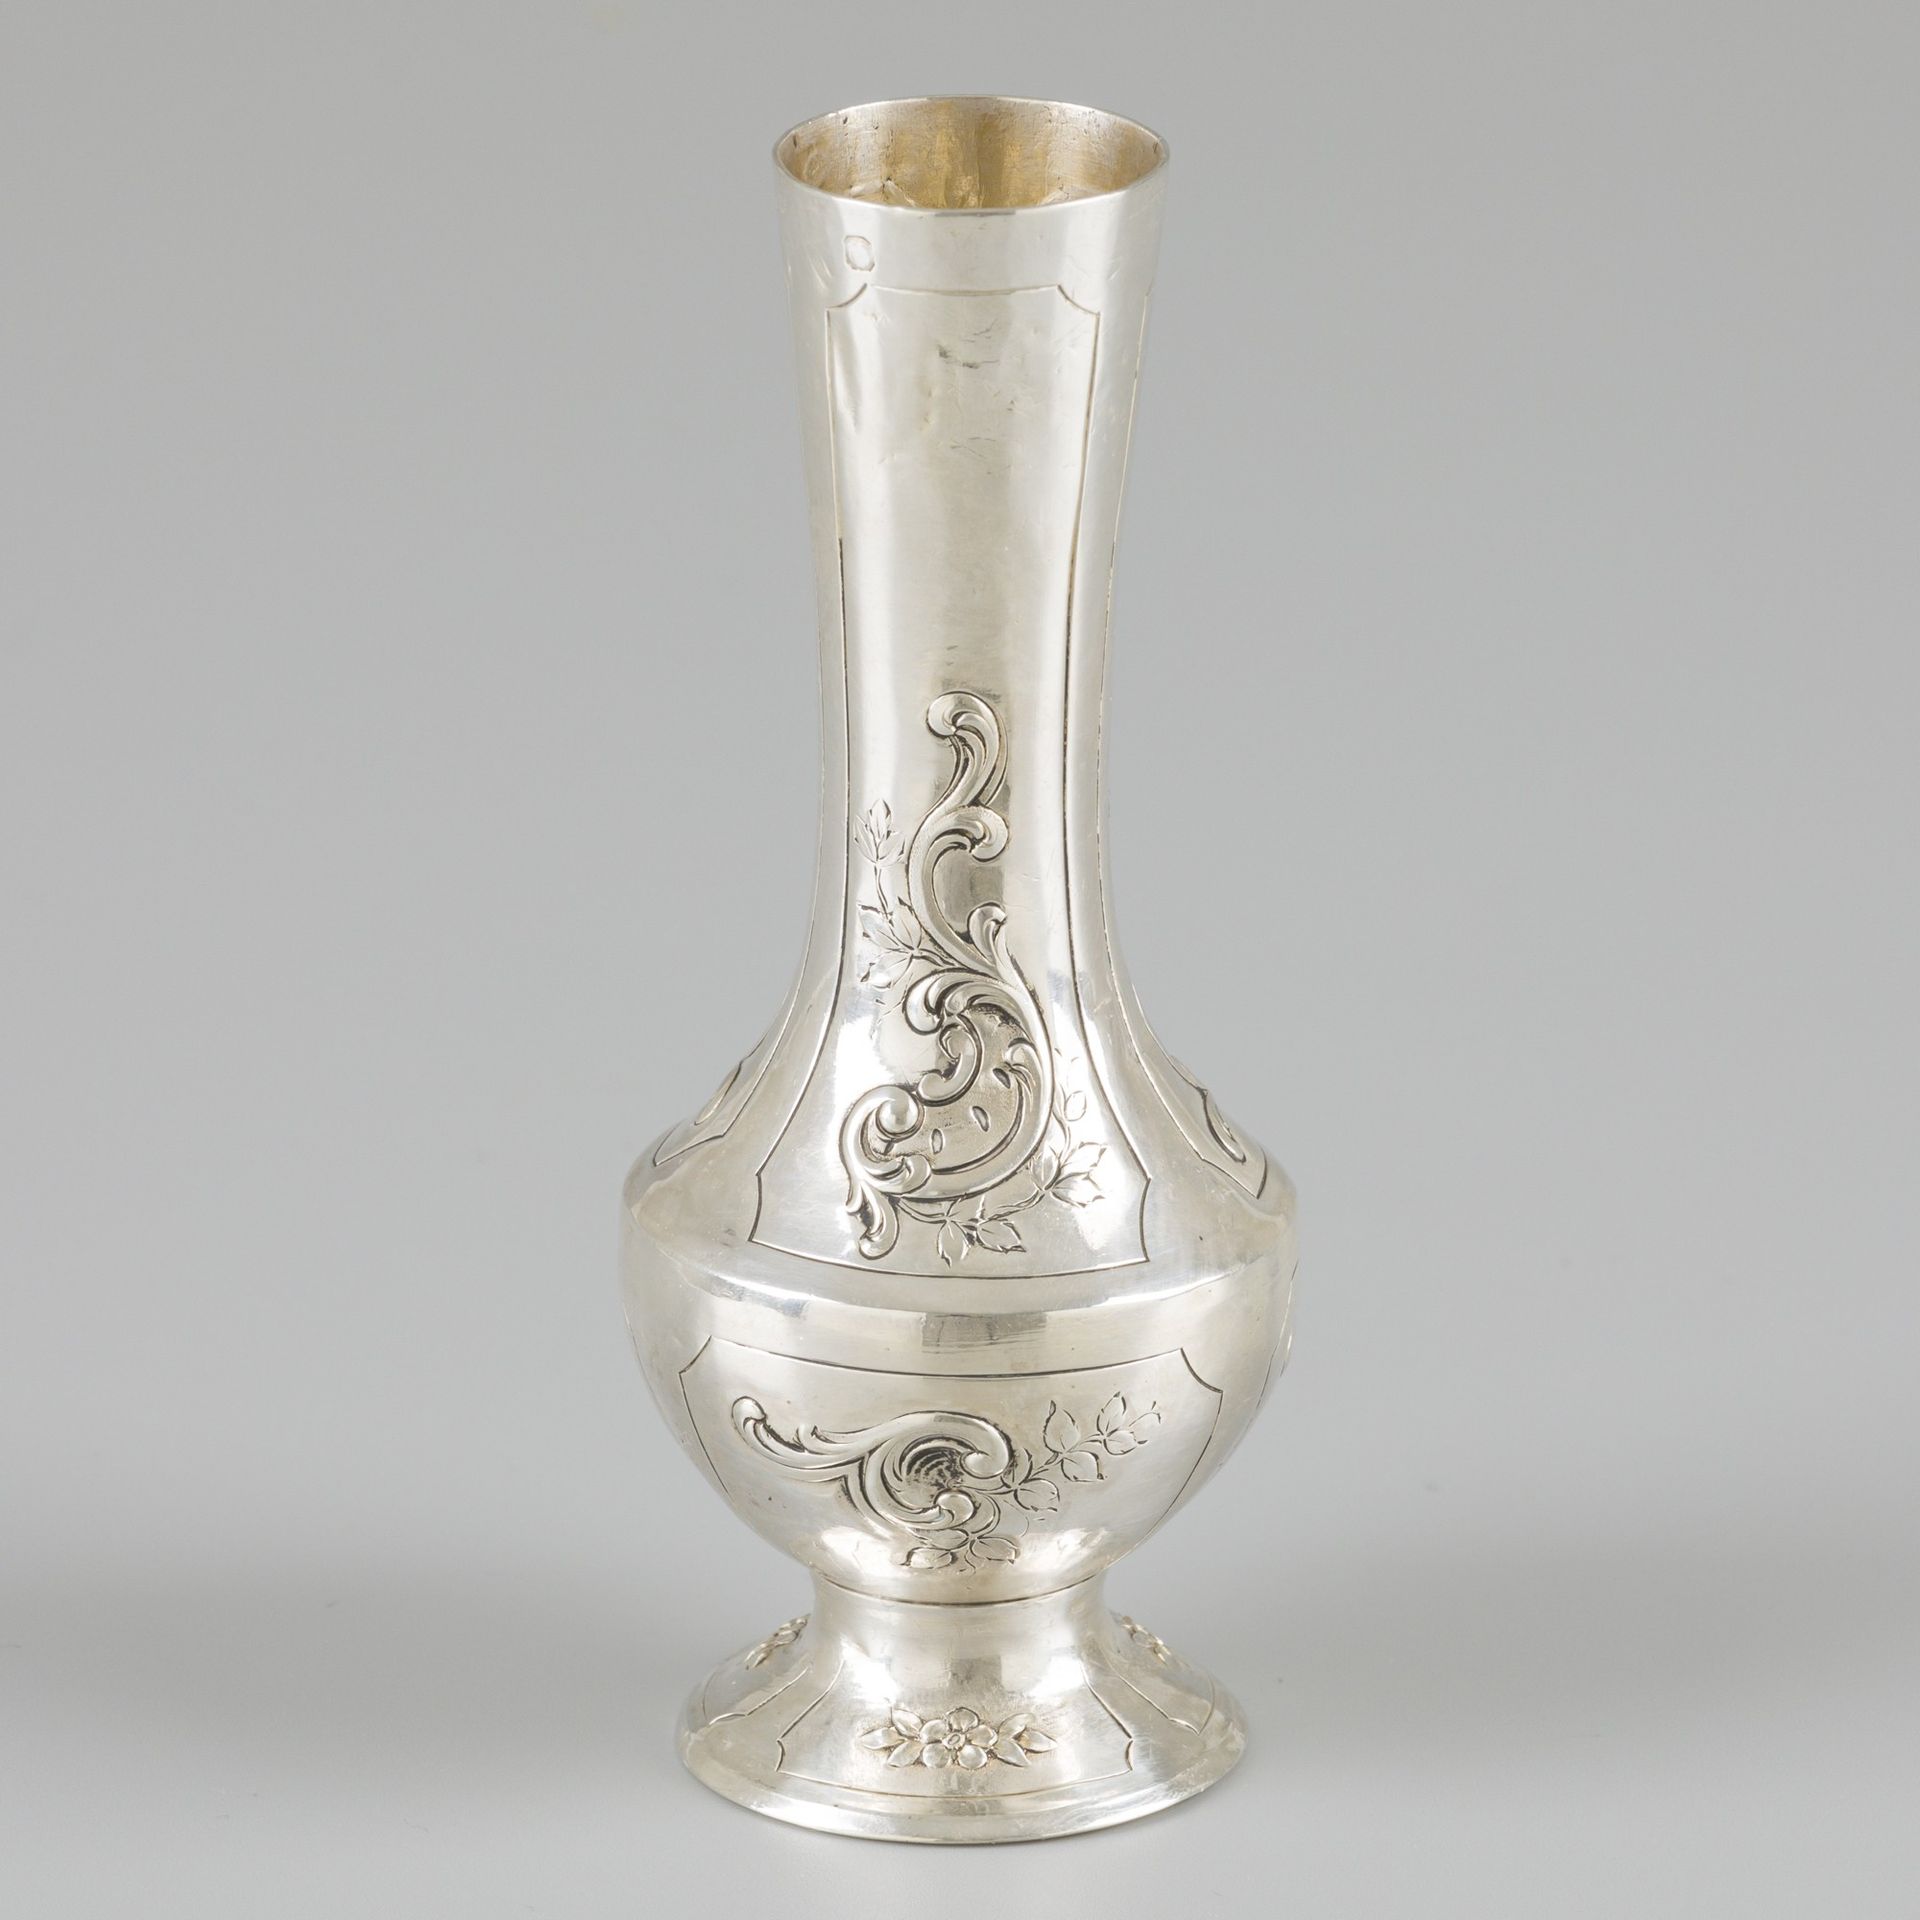 Flower vase silver. With repoussé rocailles and floral decorations, standing on &hellip;